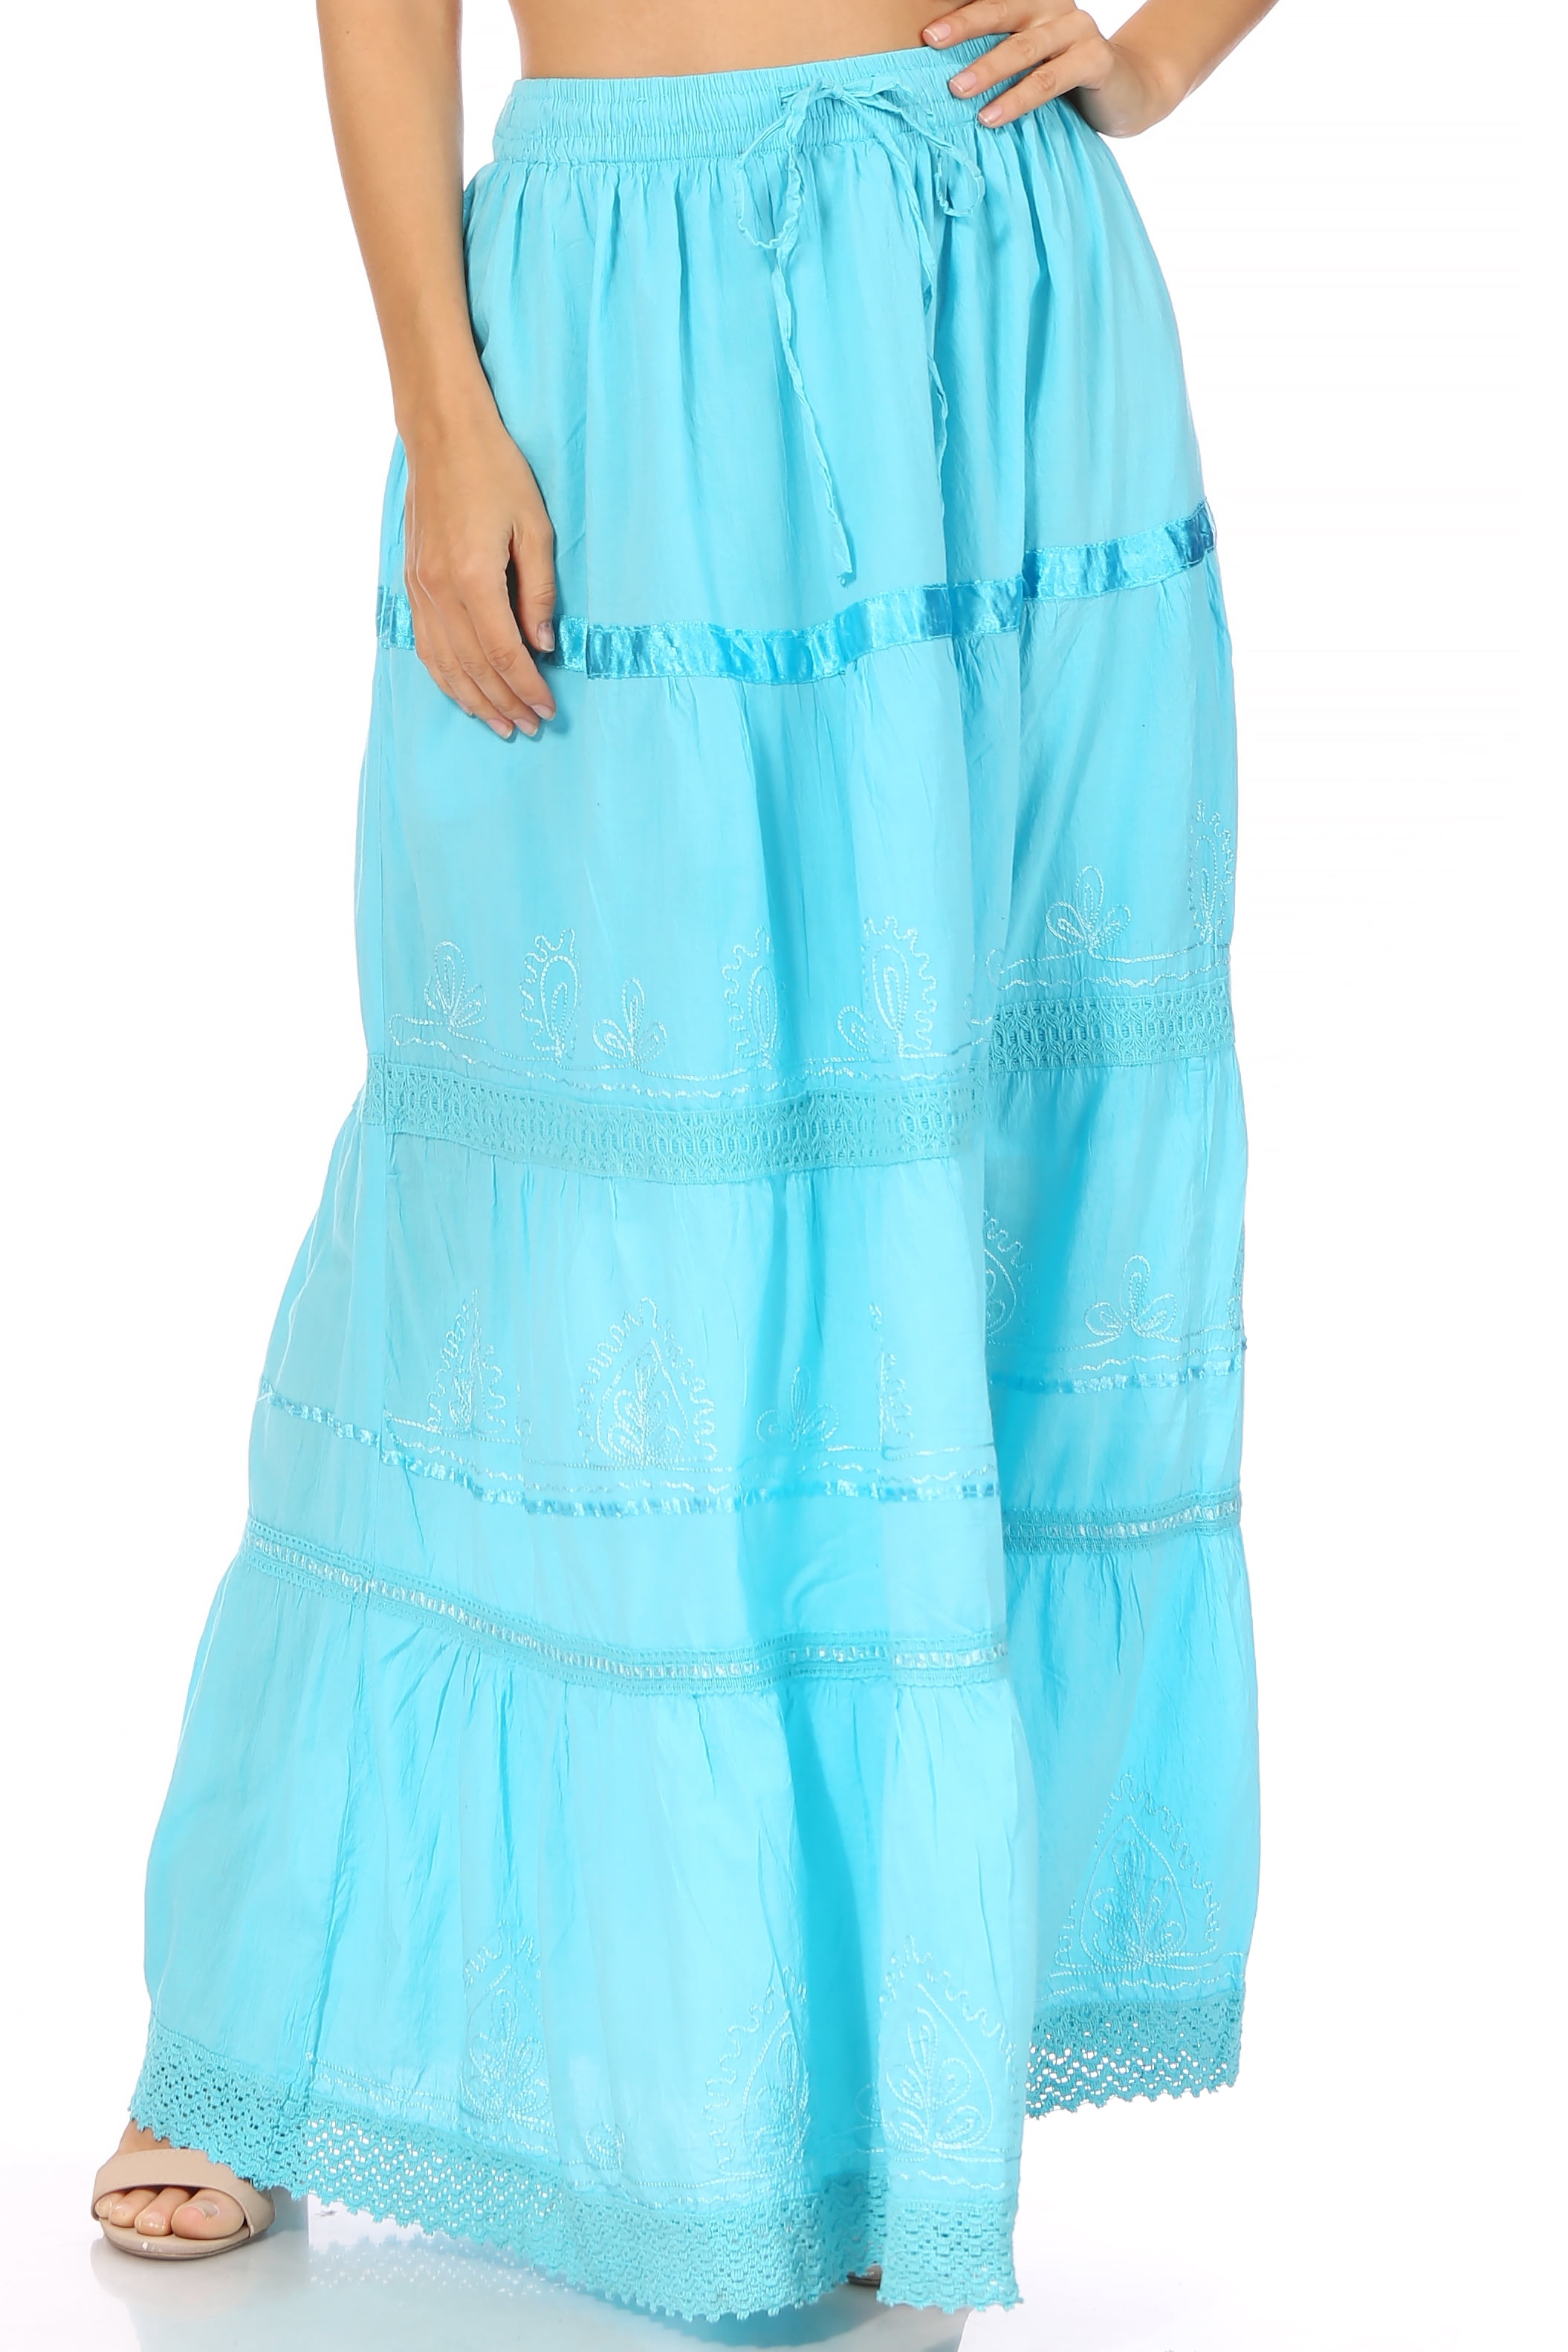 Sakkas Solid Embroidered Gypsy / Bohemian Full / Maxi / Long Cotton Skirt -  Turquoise - One Size - Walmart.com